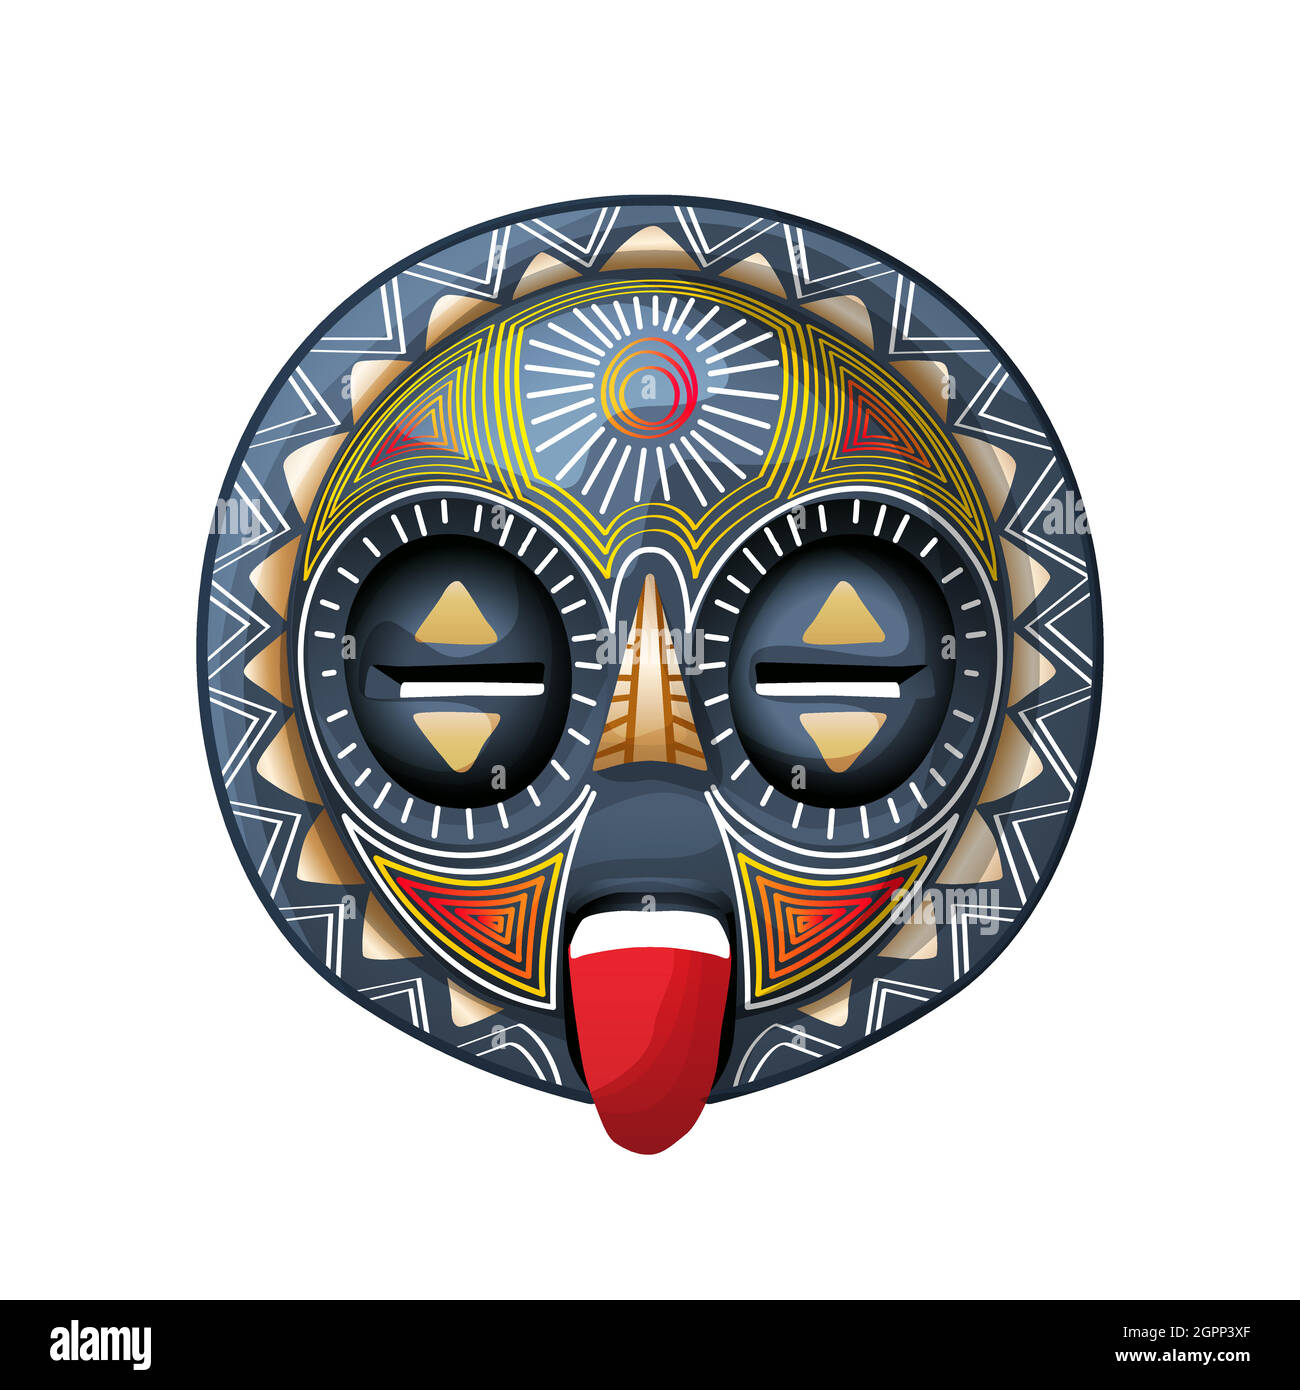 Masque tribal africain 1 Image Vectorielle Stock - Alamy